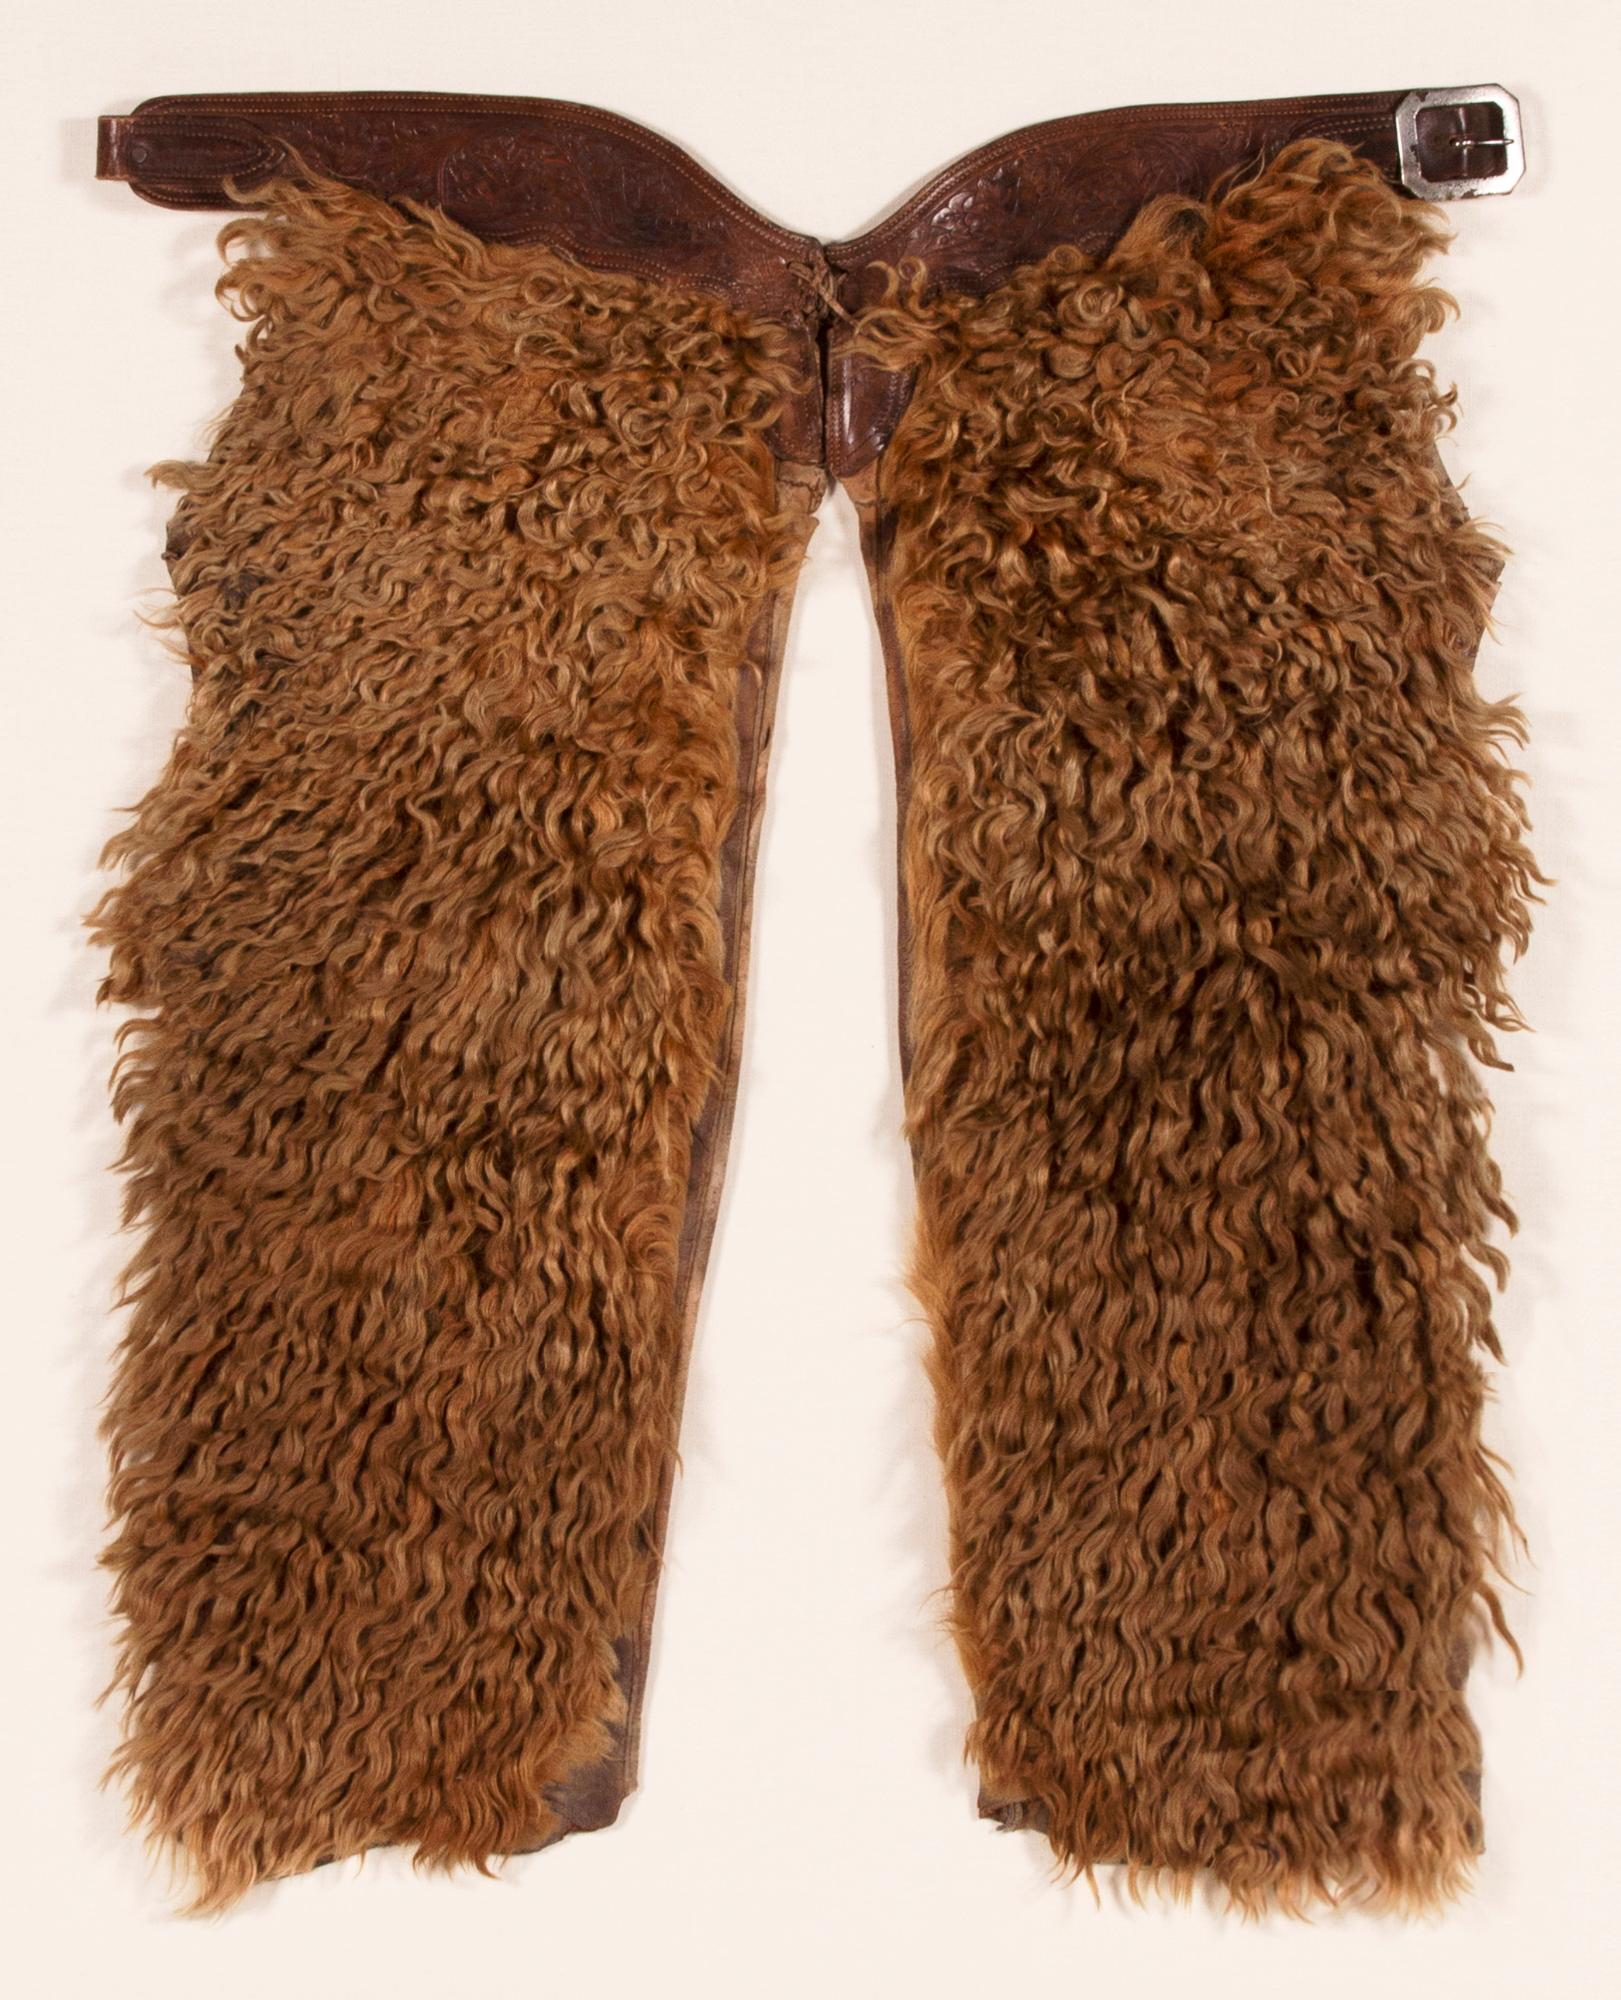 Exceptional, blonde, wooly, angora chaps, Circa 1880-1920

Wooly chaps made of leather and canvas, faced with dyed Angora, unsigned, but beautifully graphic and of exceptional quality. The blonde color, scale, and state of preservation are of